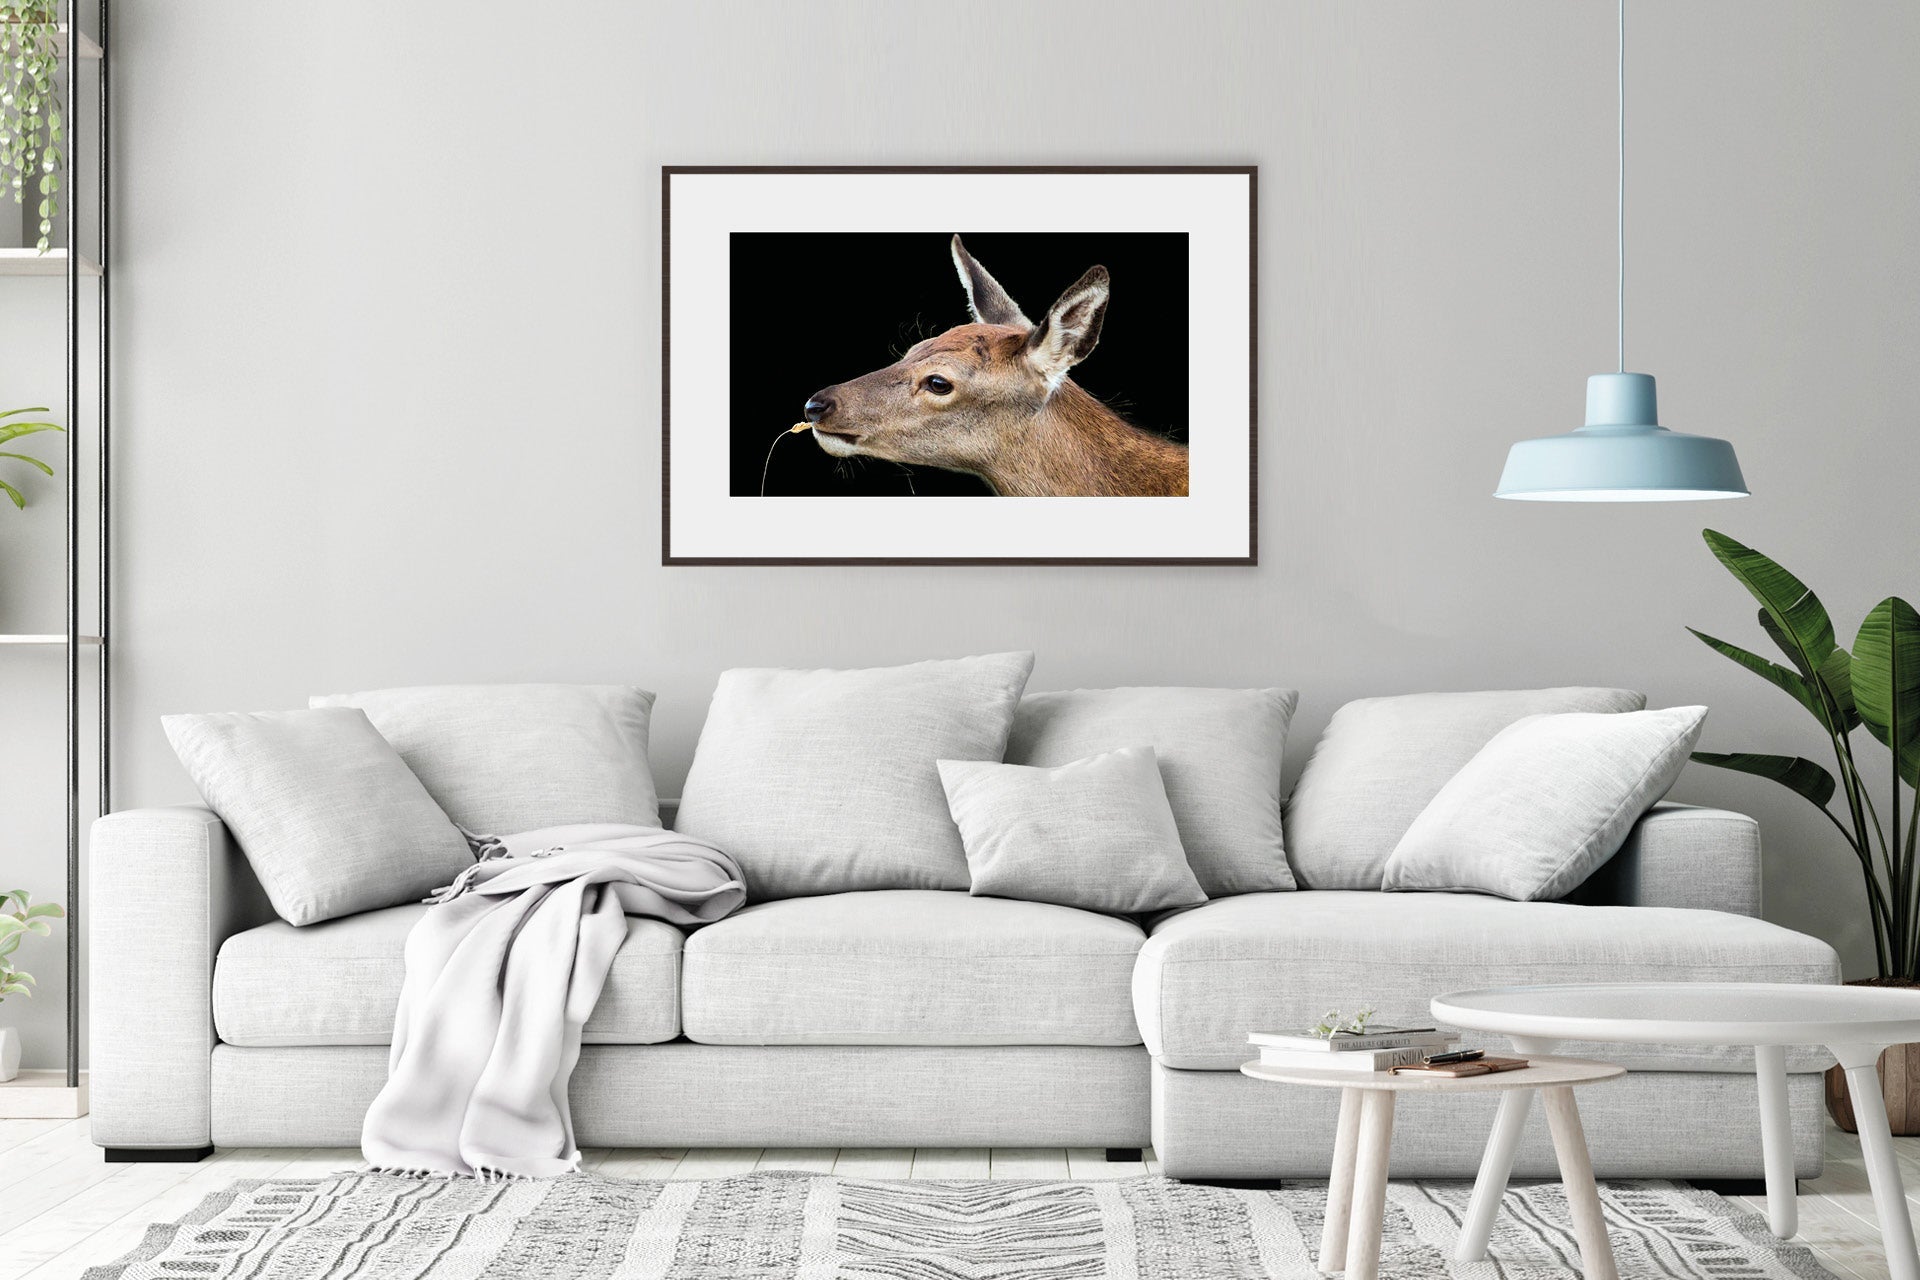 New Zealand red deer fawn image